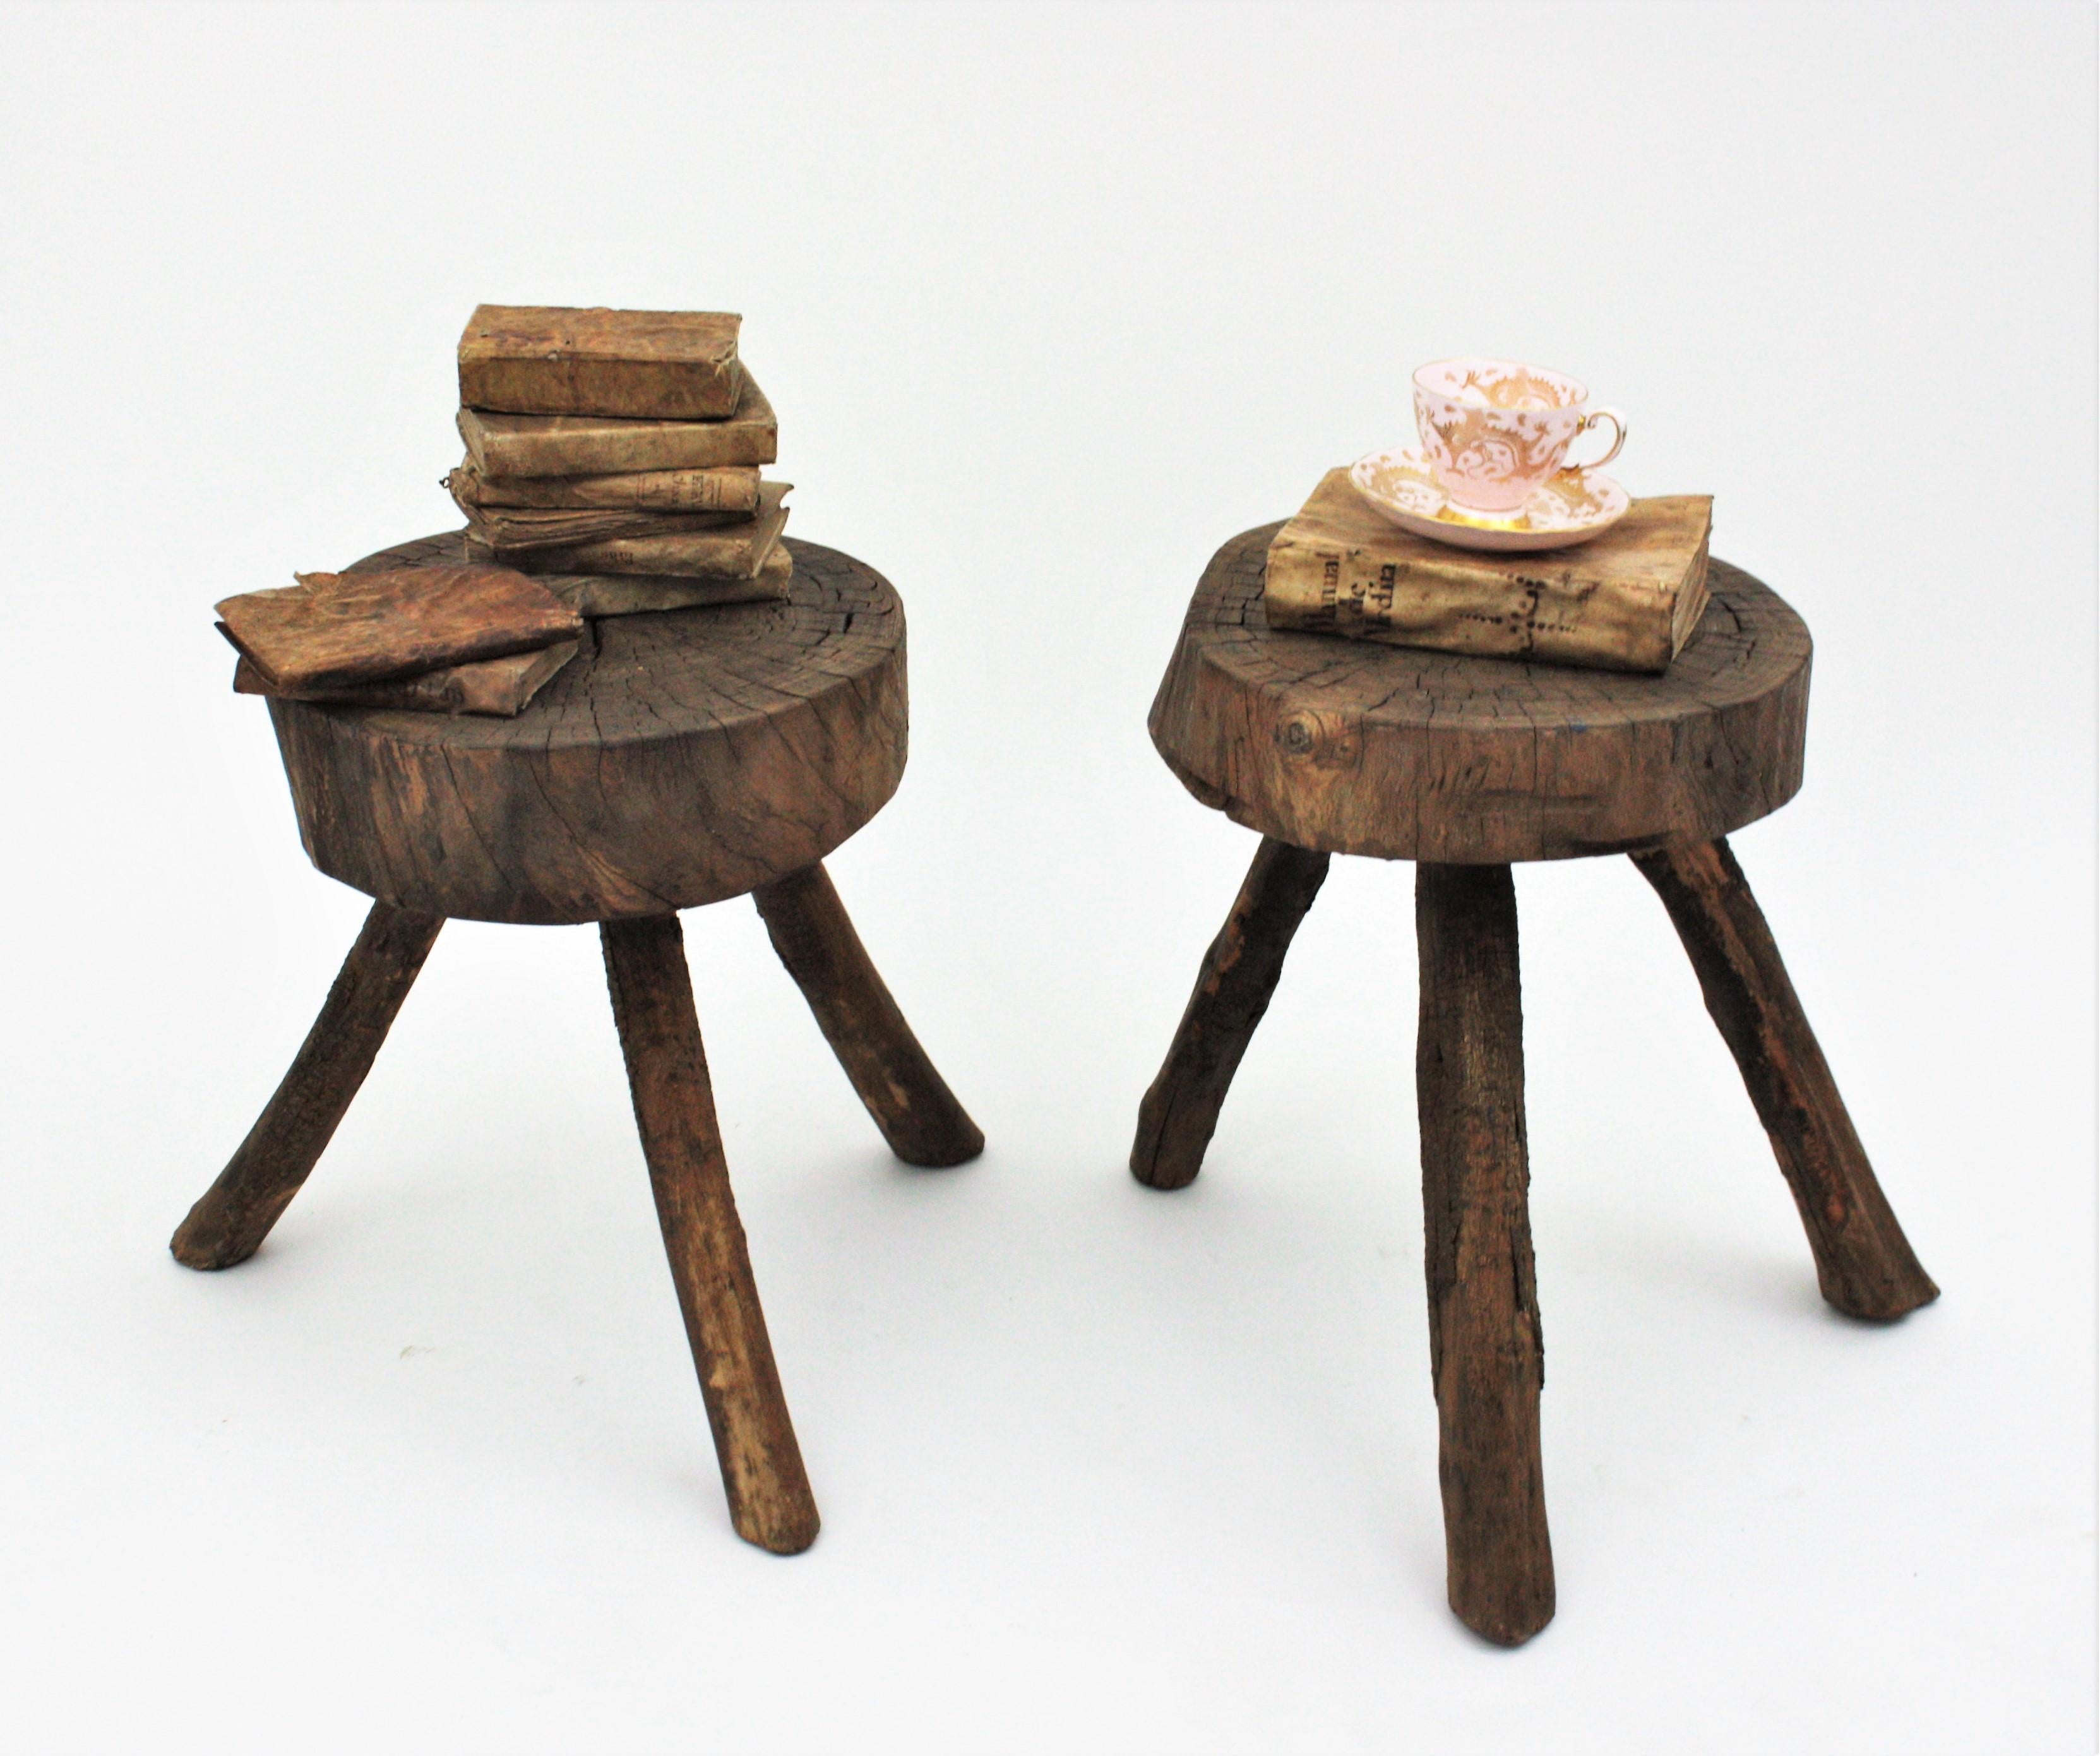 From the northen part of Spain these thick and solid rustic stools have an sturdy construction.
The thick and aged tops and the primitive construction mark the difference in these pieces.
They can be used as stools or occassional tables, side or